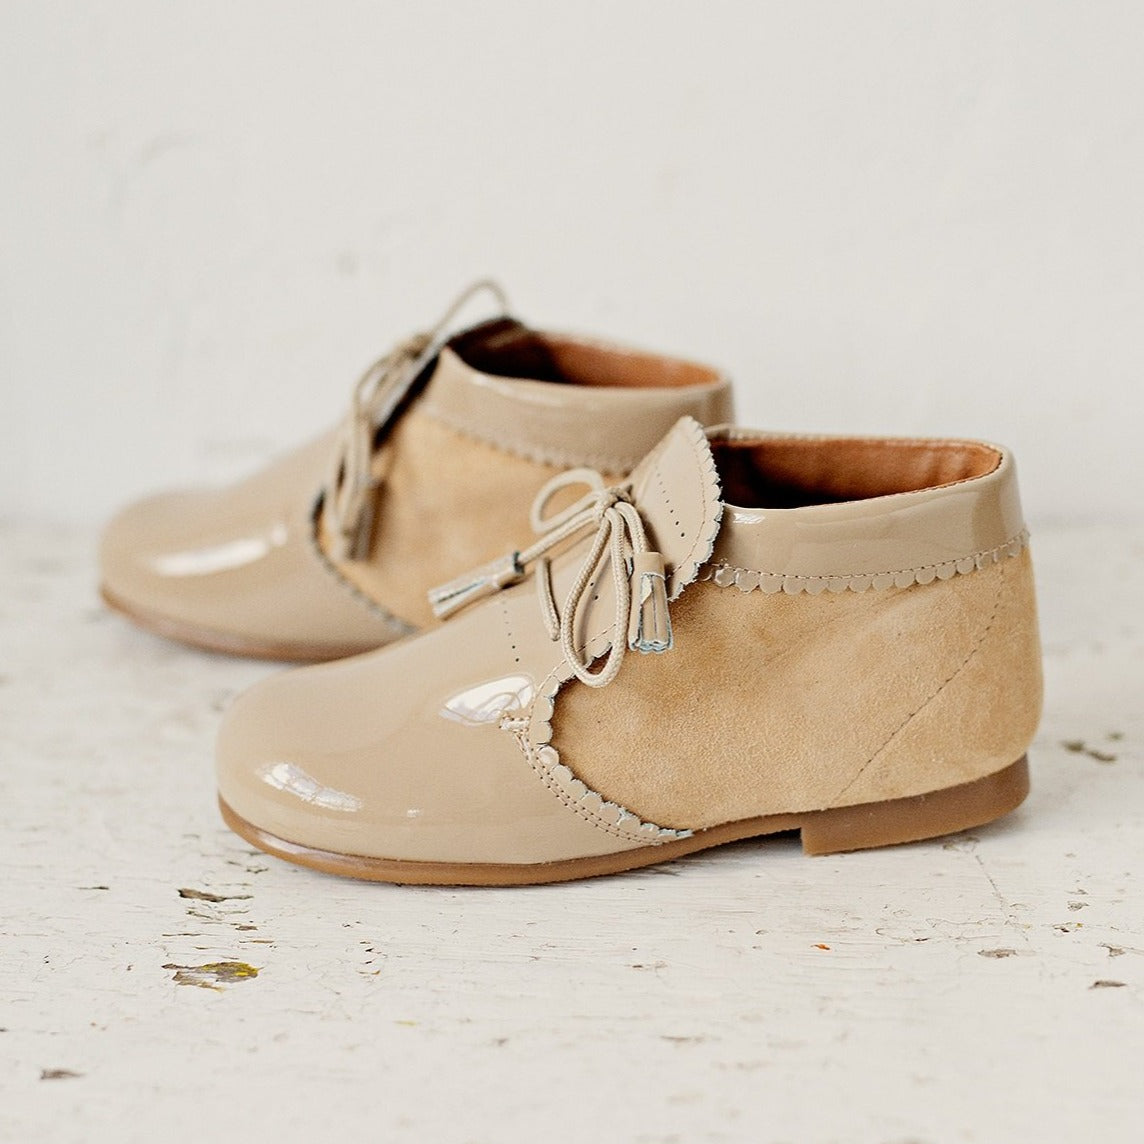 Beautiful smart-casual style lace-up ankle boots with a lovely tassel detail. Made with an adorable combination of Beige Patent Leather and Suede of the highest quality. Olivia Ann Shoes